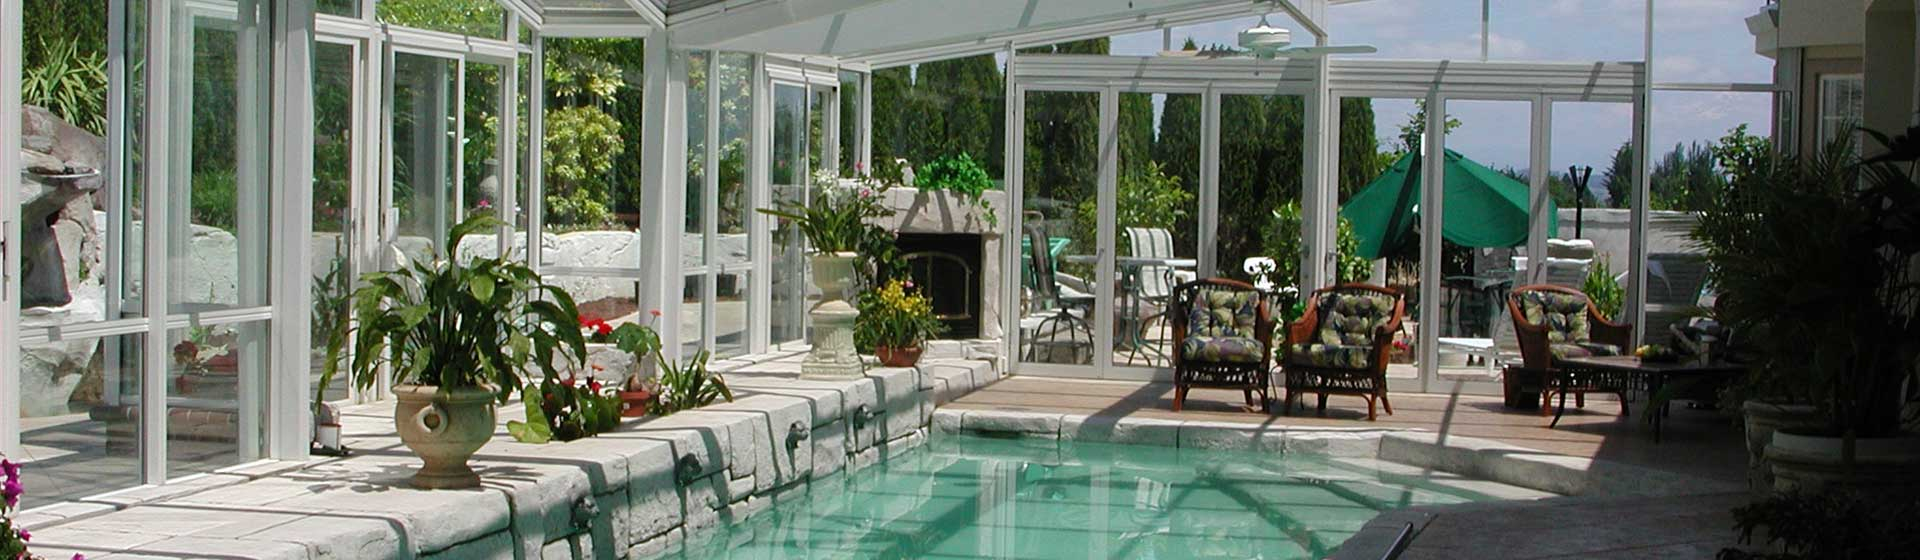 Seattle Patio Covers Sunrooms Solariums Pool Enclosures pertaining to proportions 1920 X 560